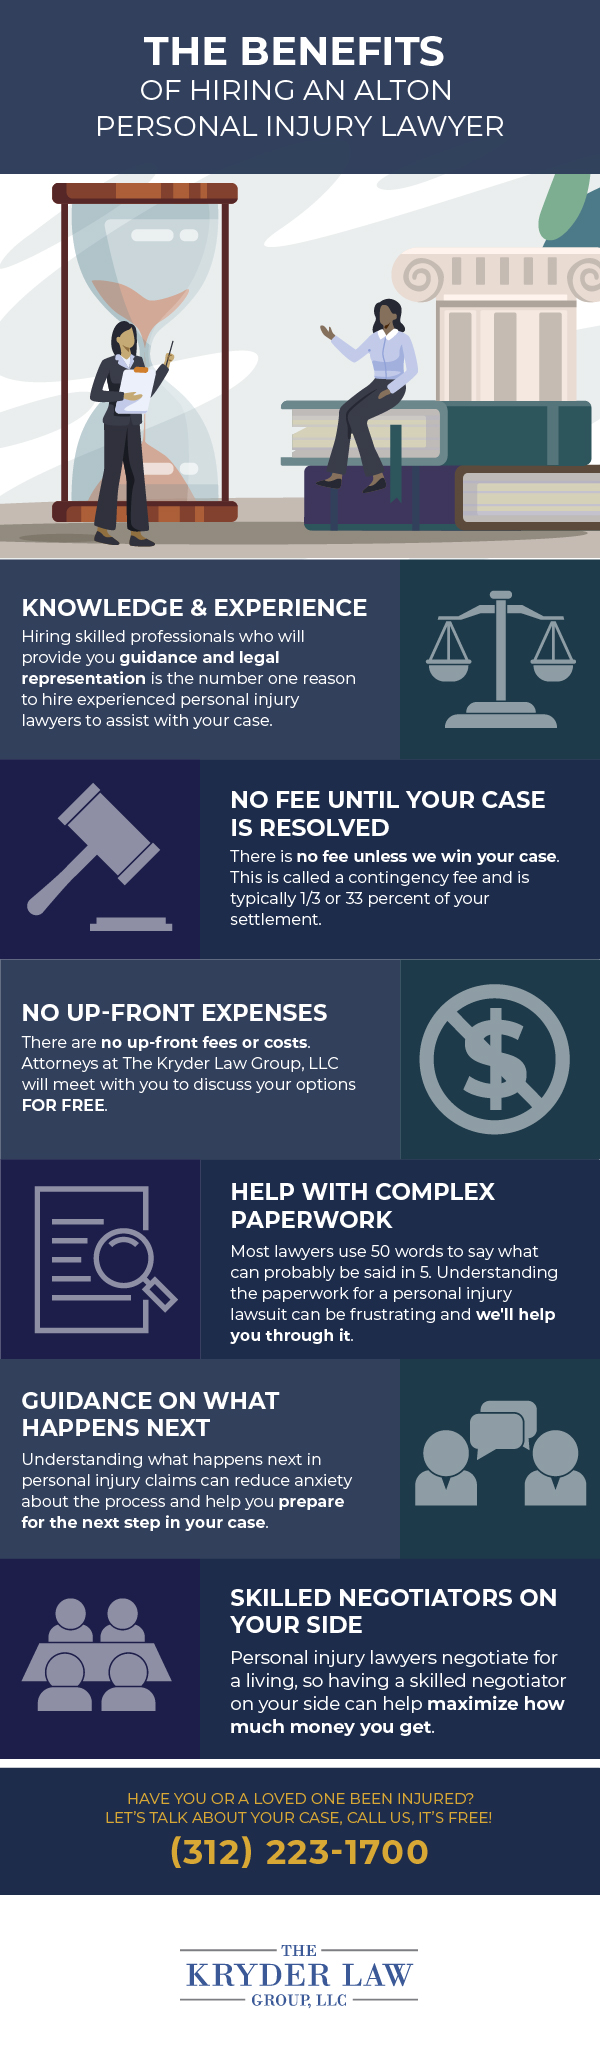 Alton Personal Injury Lawyer Infographic